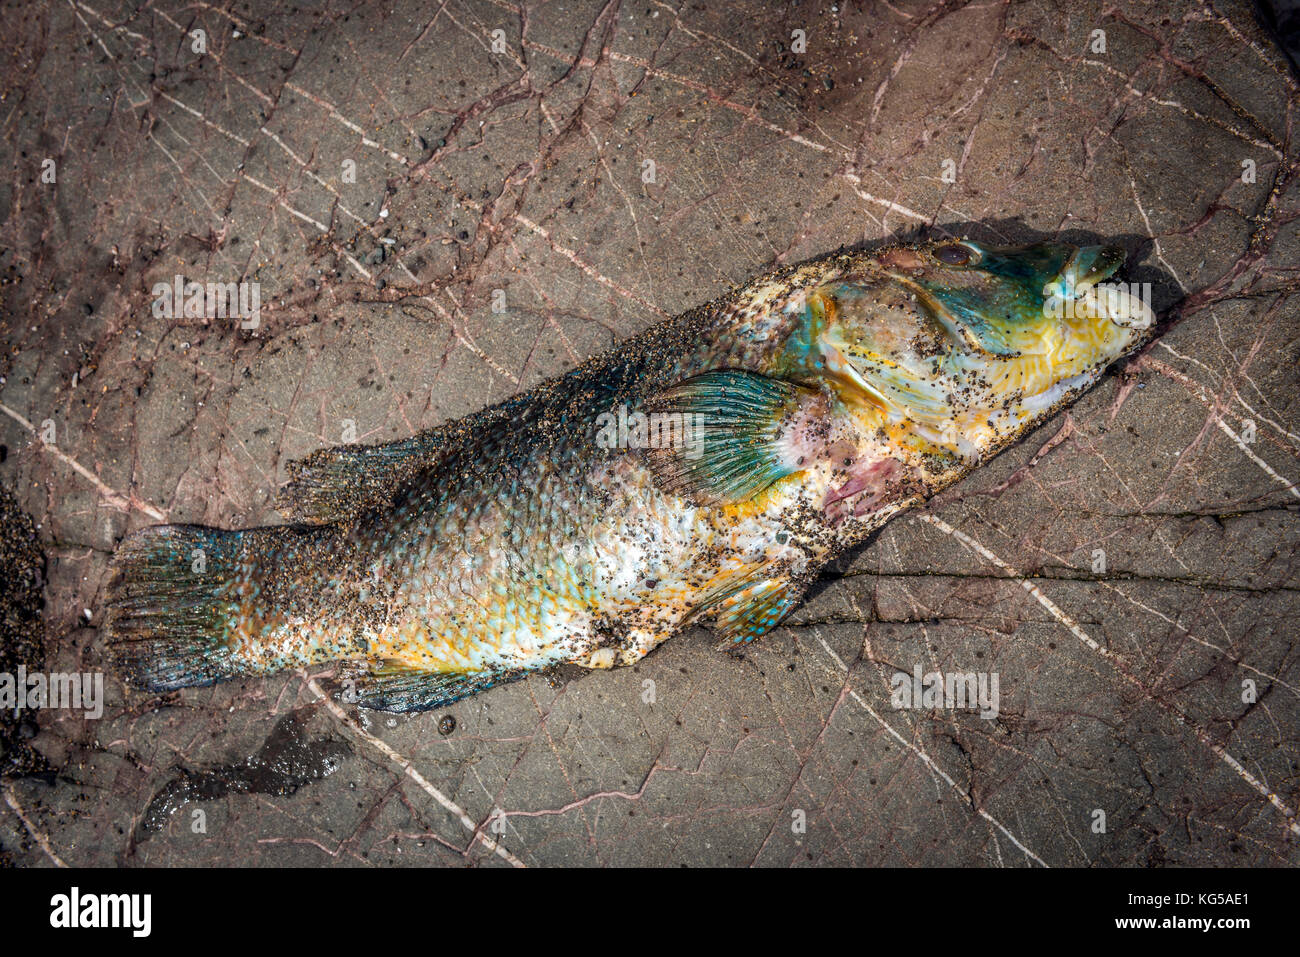 A sadly dead, but rarely sighted Rainbow Wrasse on the beach at Whitsand Bay, Cornwall, UK Stock Photo